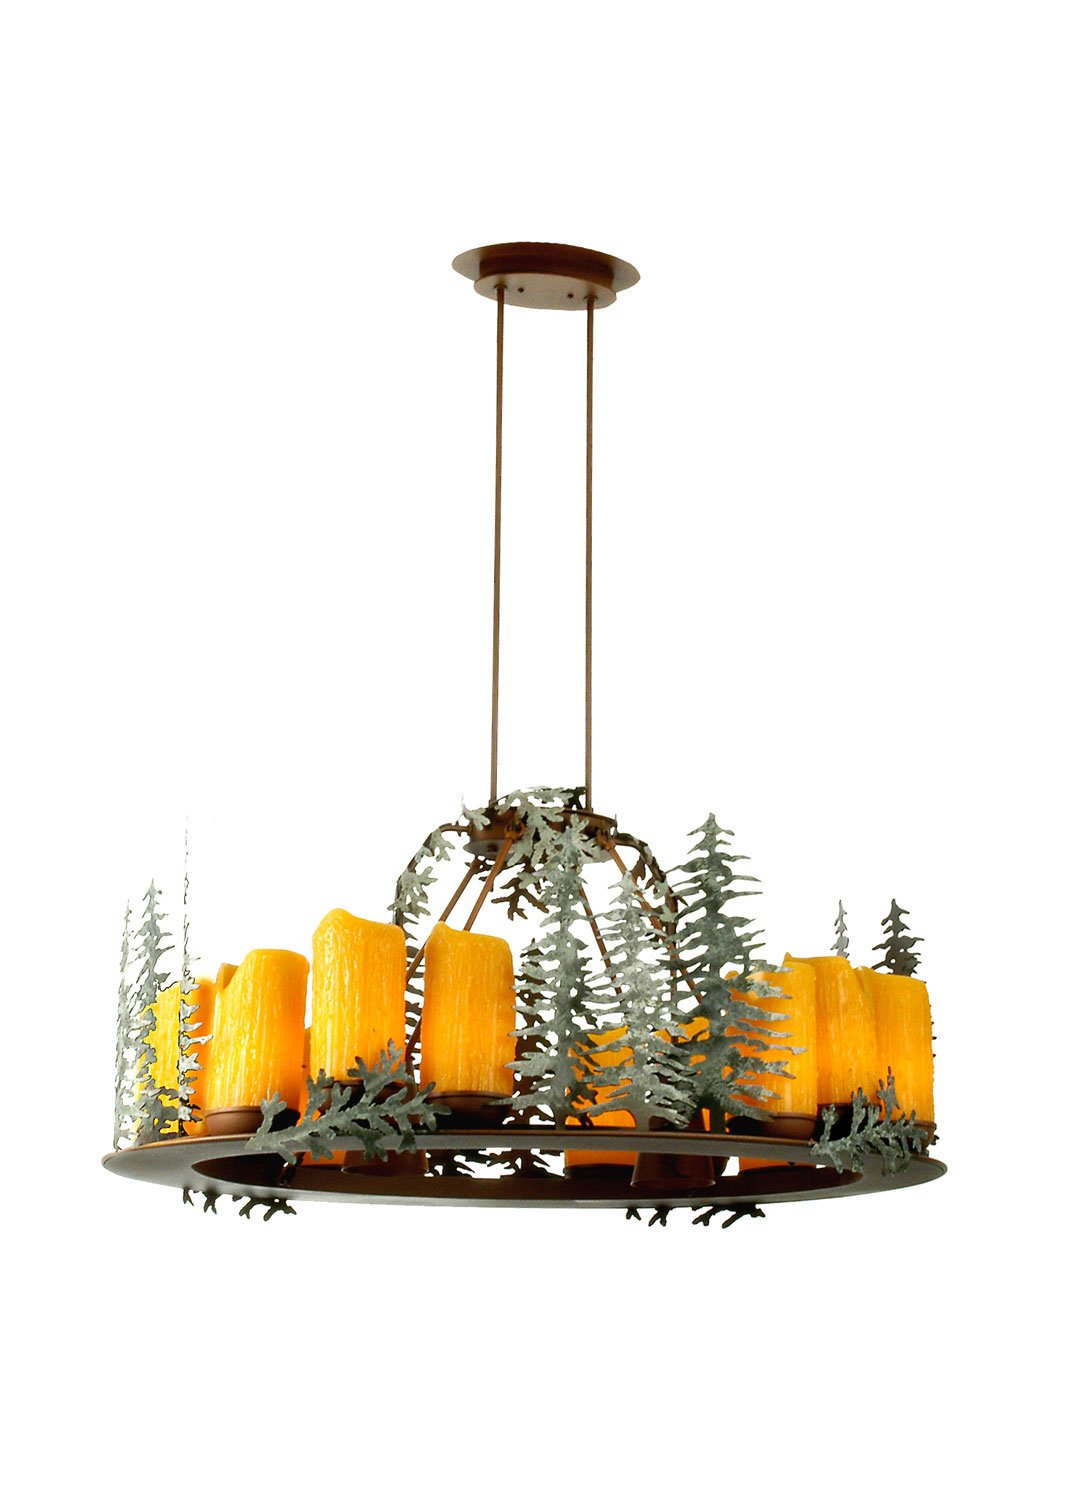 42"L Tall Pines 12 Light Oval Chandelier